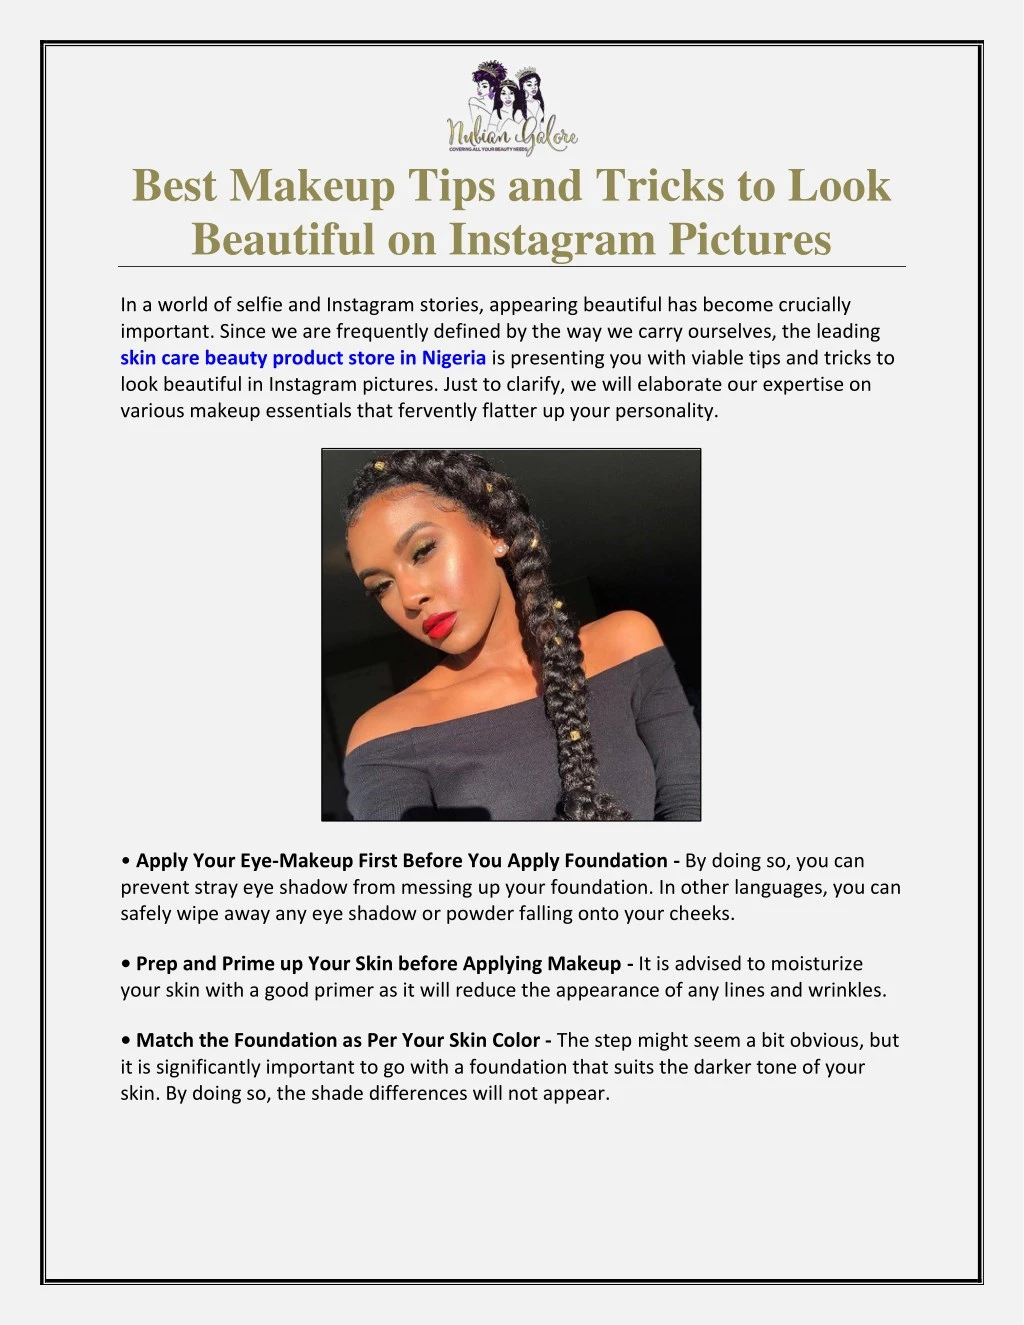 best makeup tips and tricks to look beautiful